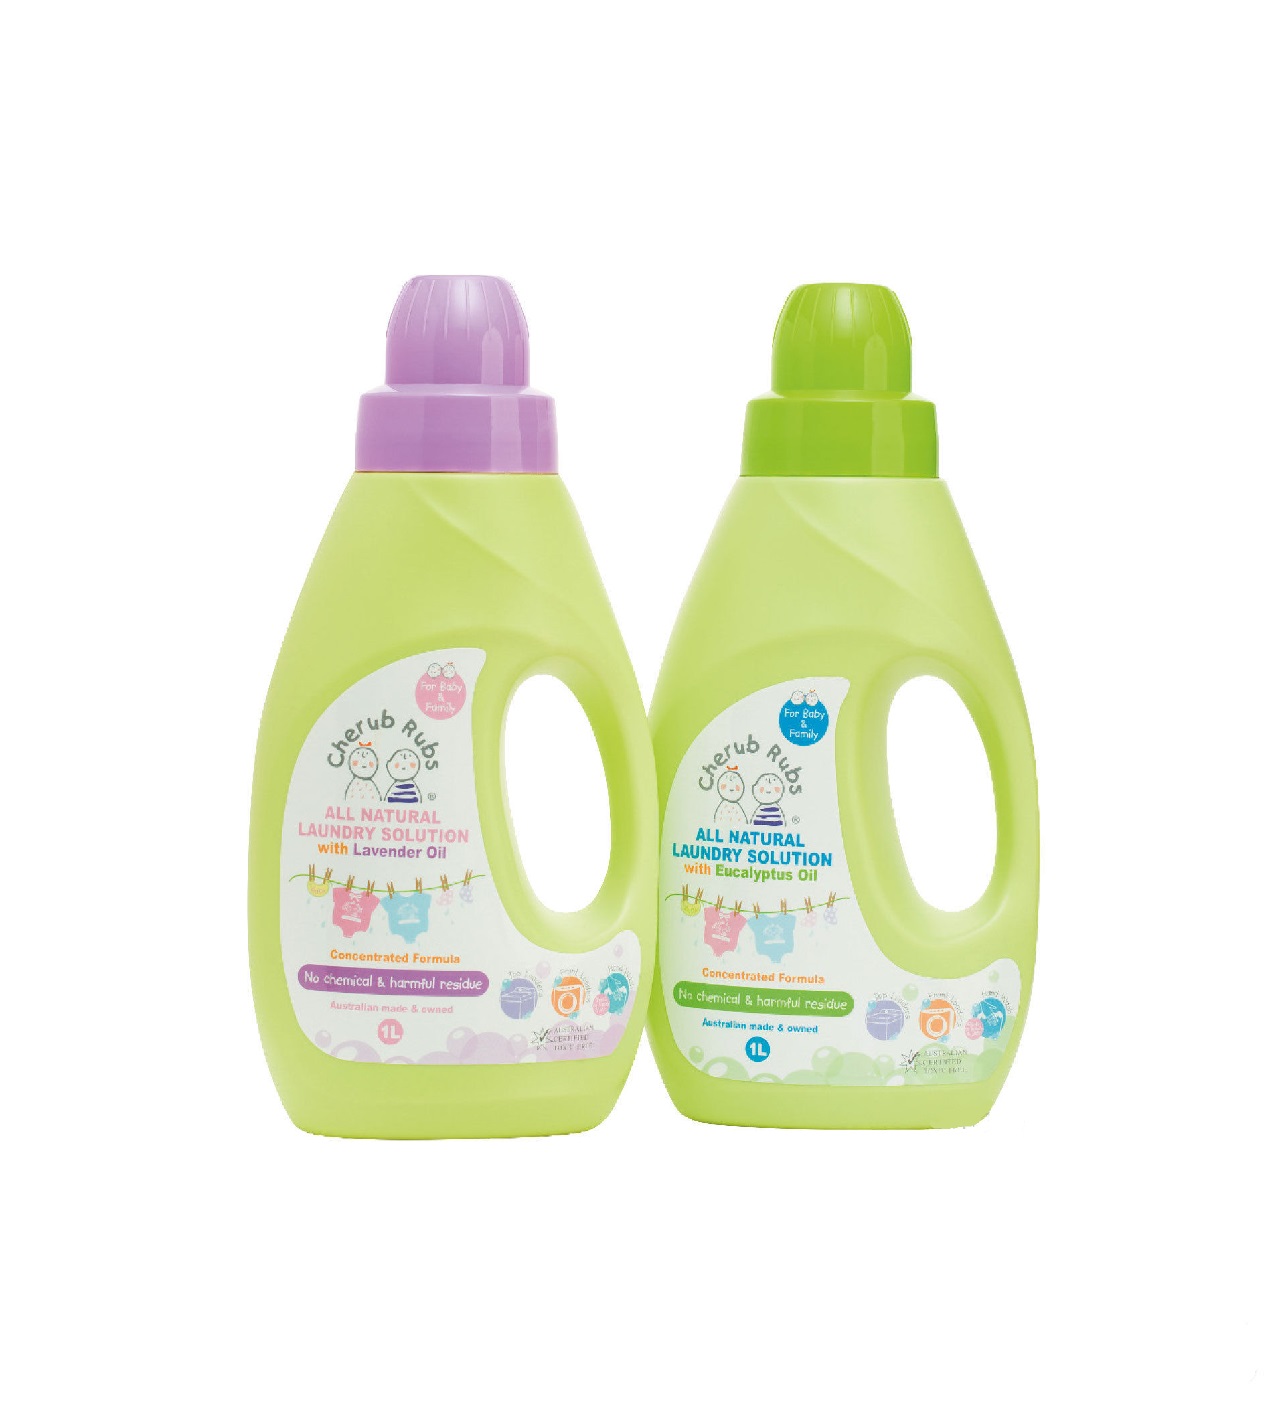 All Natural Laundry Solution Eucalyptus 1L Twins pack